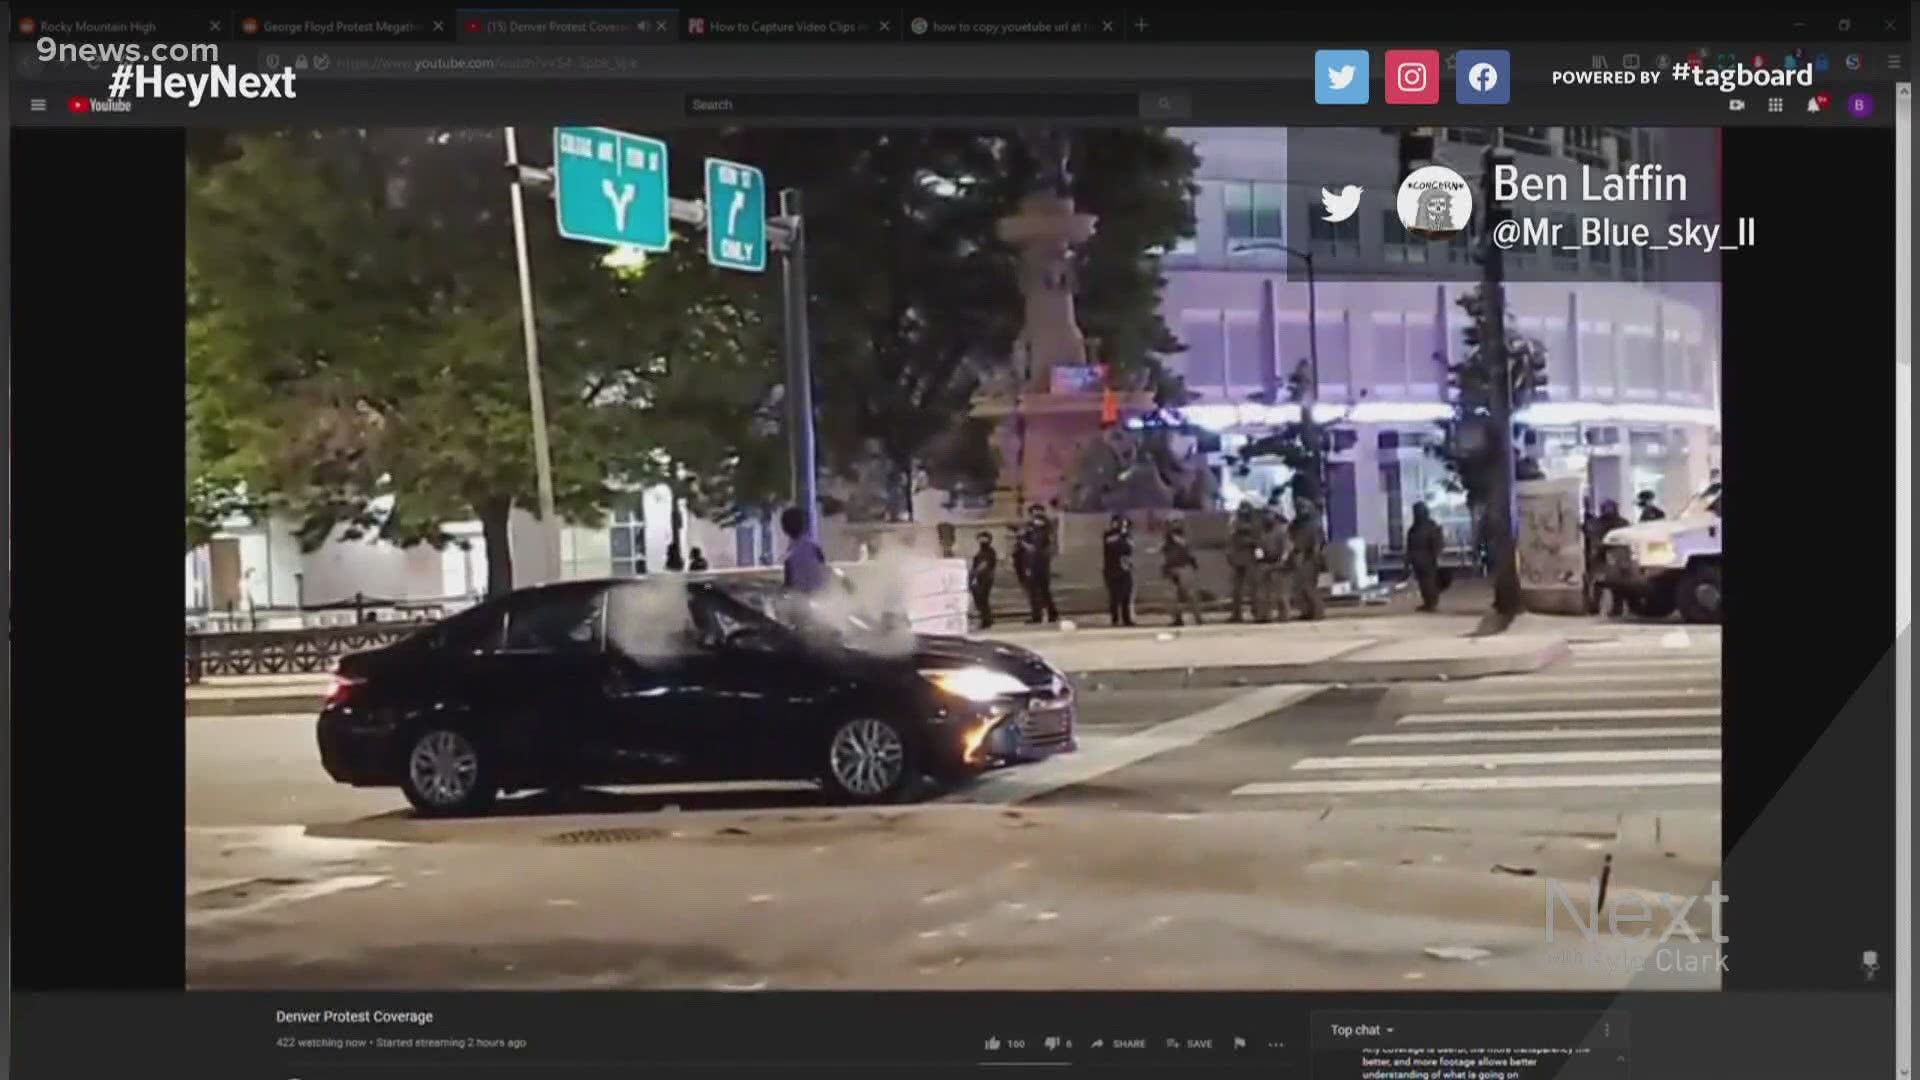 Videos on social media, showing Denver Police using force on protesters who don’t seem to show aggression, will get a look from the department.